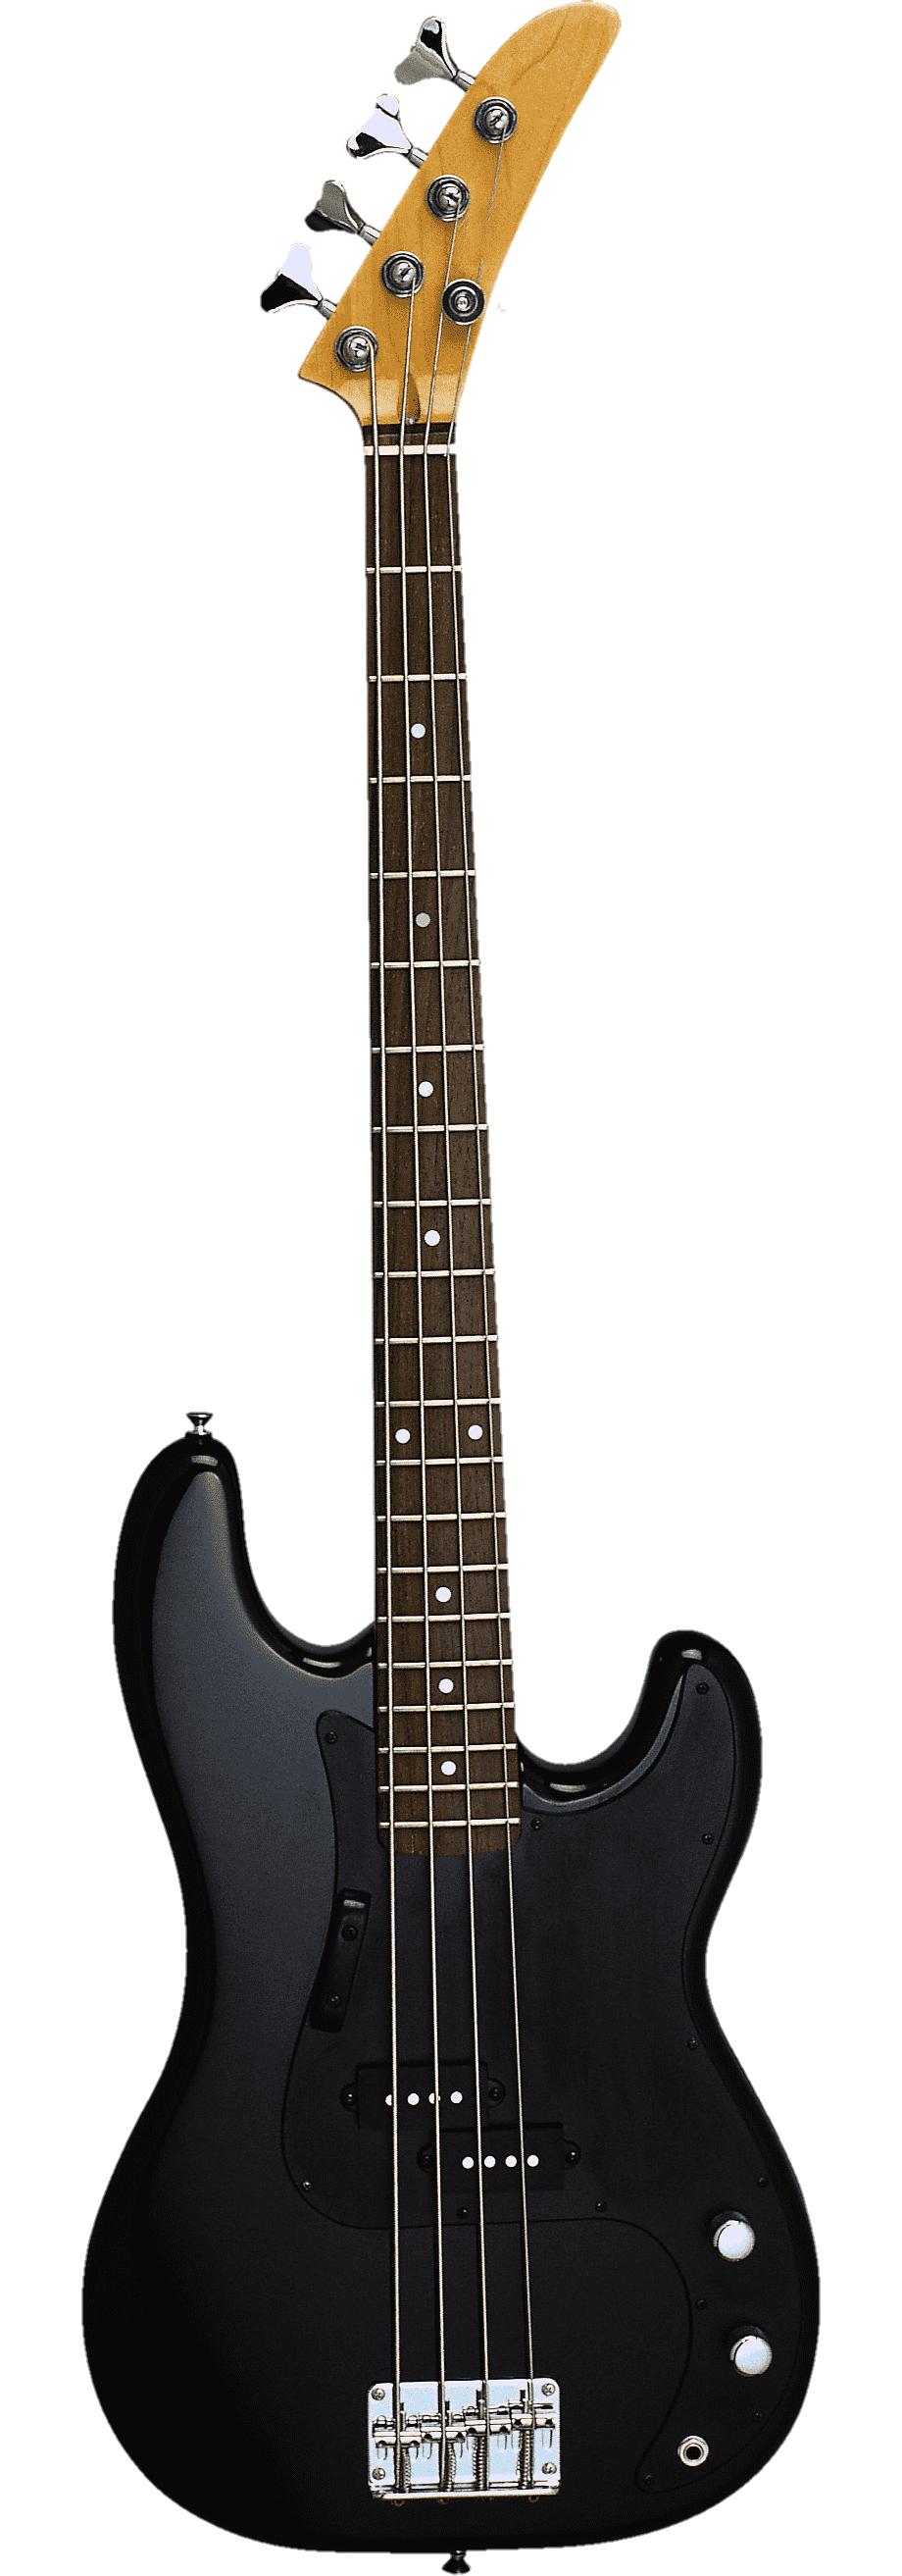 guitar-png-image-from-pngfre-10